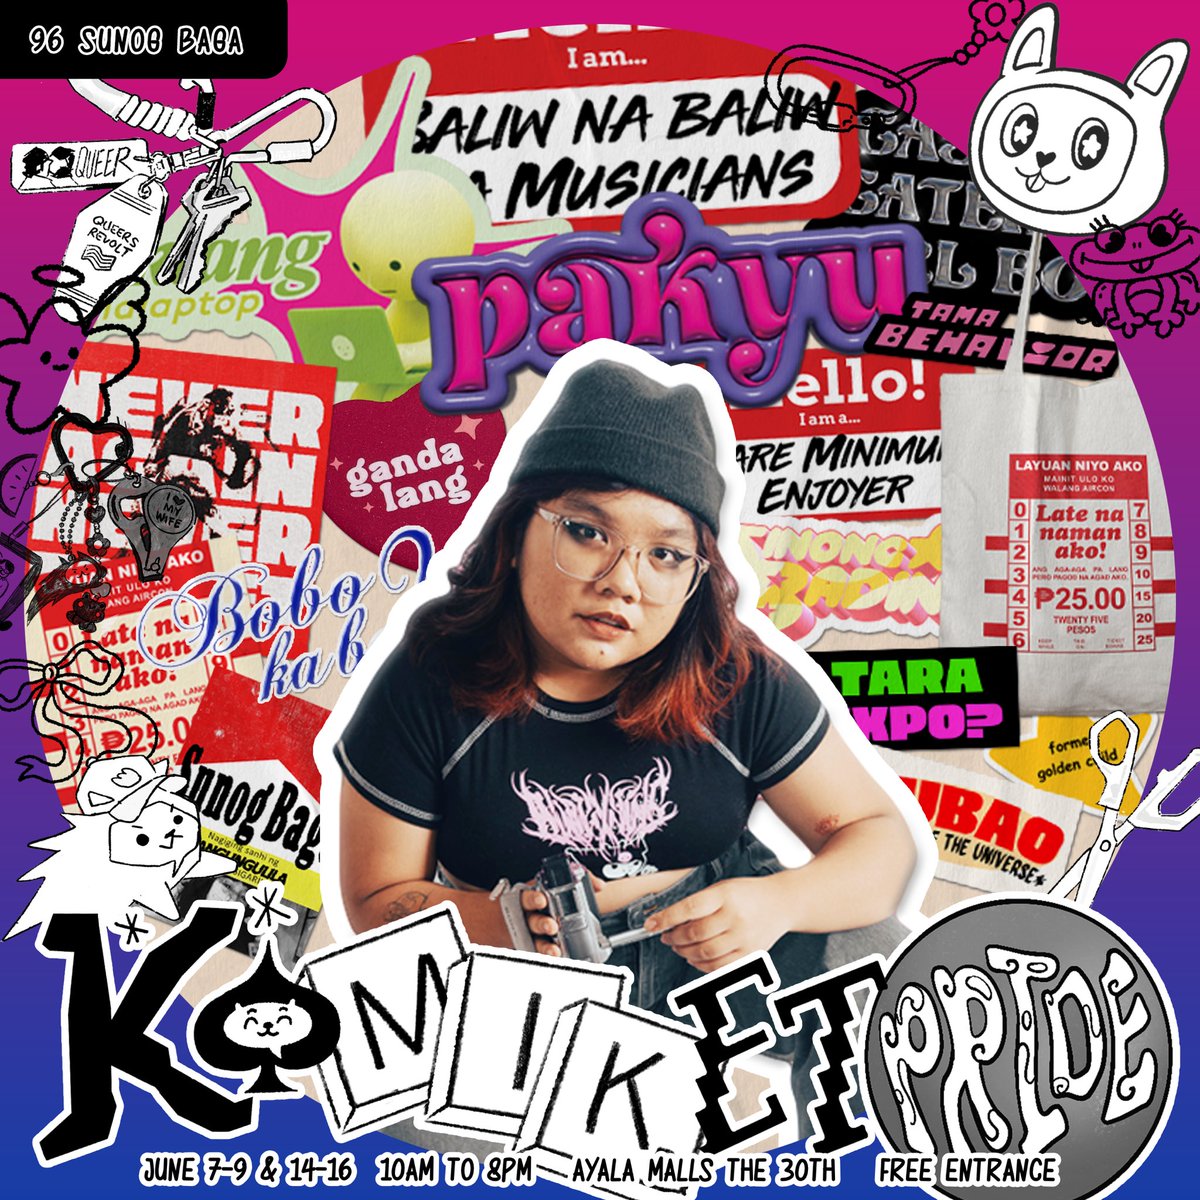 WE 💎🕺 Are gonna be at #komiketpride~ 🧍‍♀️💃  Update the haul, add unto that art wall, and catch the crew for those awesome prints, stickers, komiks, merch & zines made by your local queer artist & creators this June 7-9, 10am to 8pm, Ayala Malls The 30th. Free Entrance!